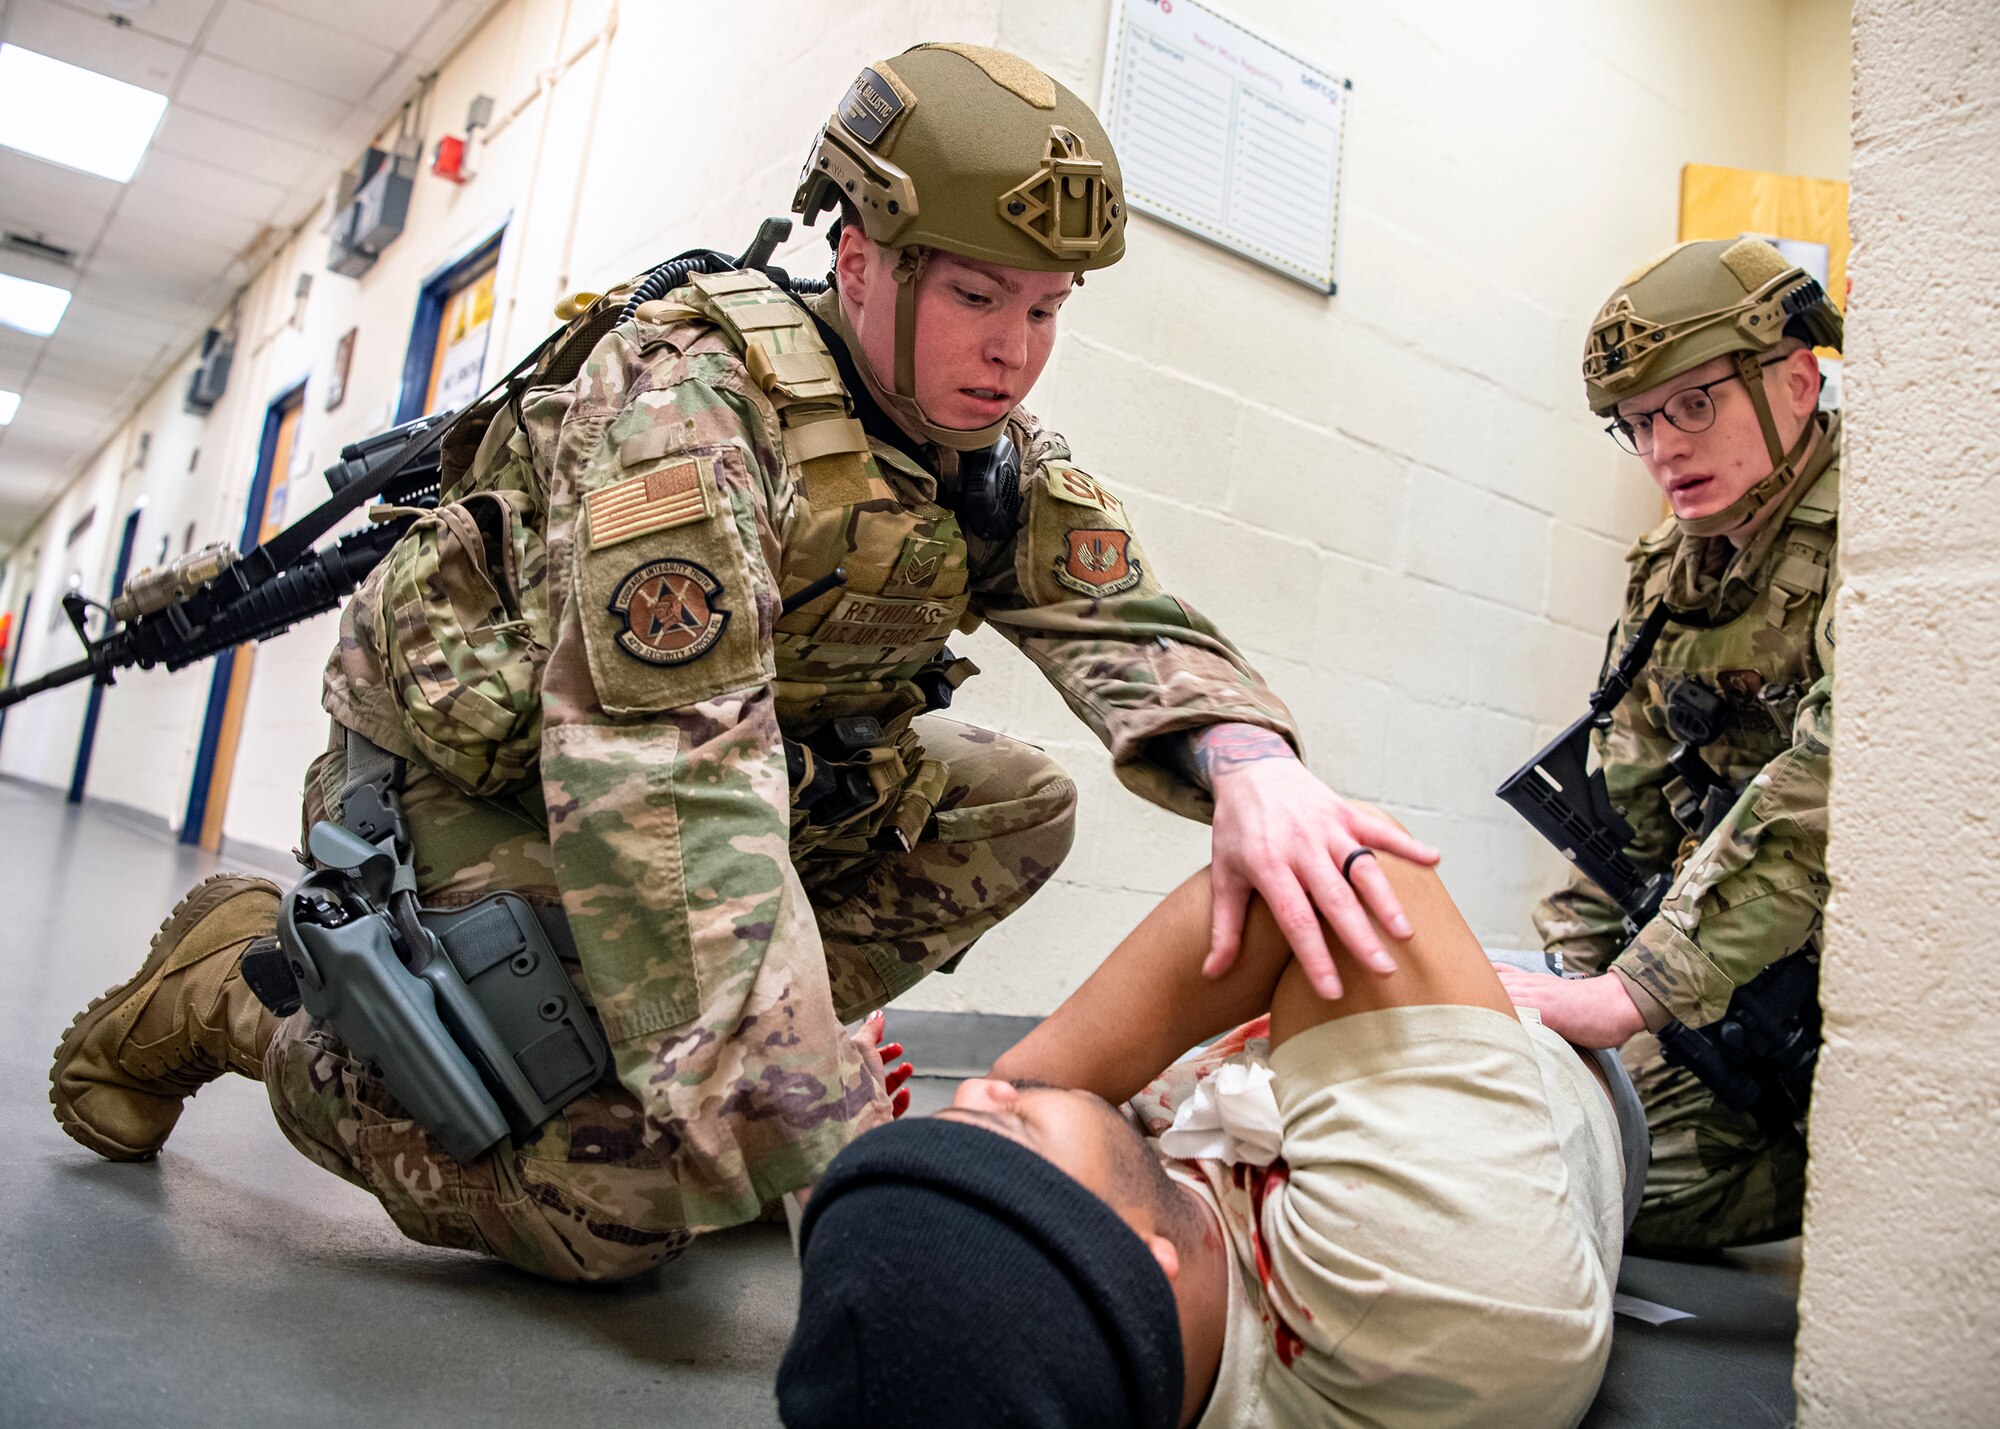 Staff Sgt. Chelsea Reynolds, (left) 423d Security Forces Squadron flight sergeant, and Senior Airman Wyatt White, (right), tend to a simulated victim during a readiness exercise, at RAF Molesworth, England, Feb. 11, 2020. The exercise tested the wing’s preparedness and response capabilities to an emergency situation. (U.S. Air Force photo by Senior Airman Eugene Oliver)